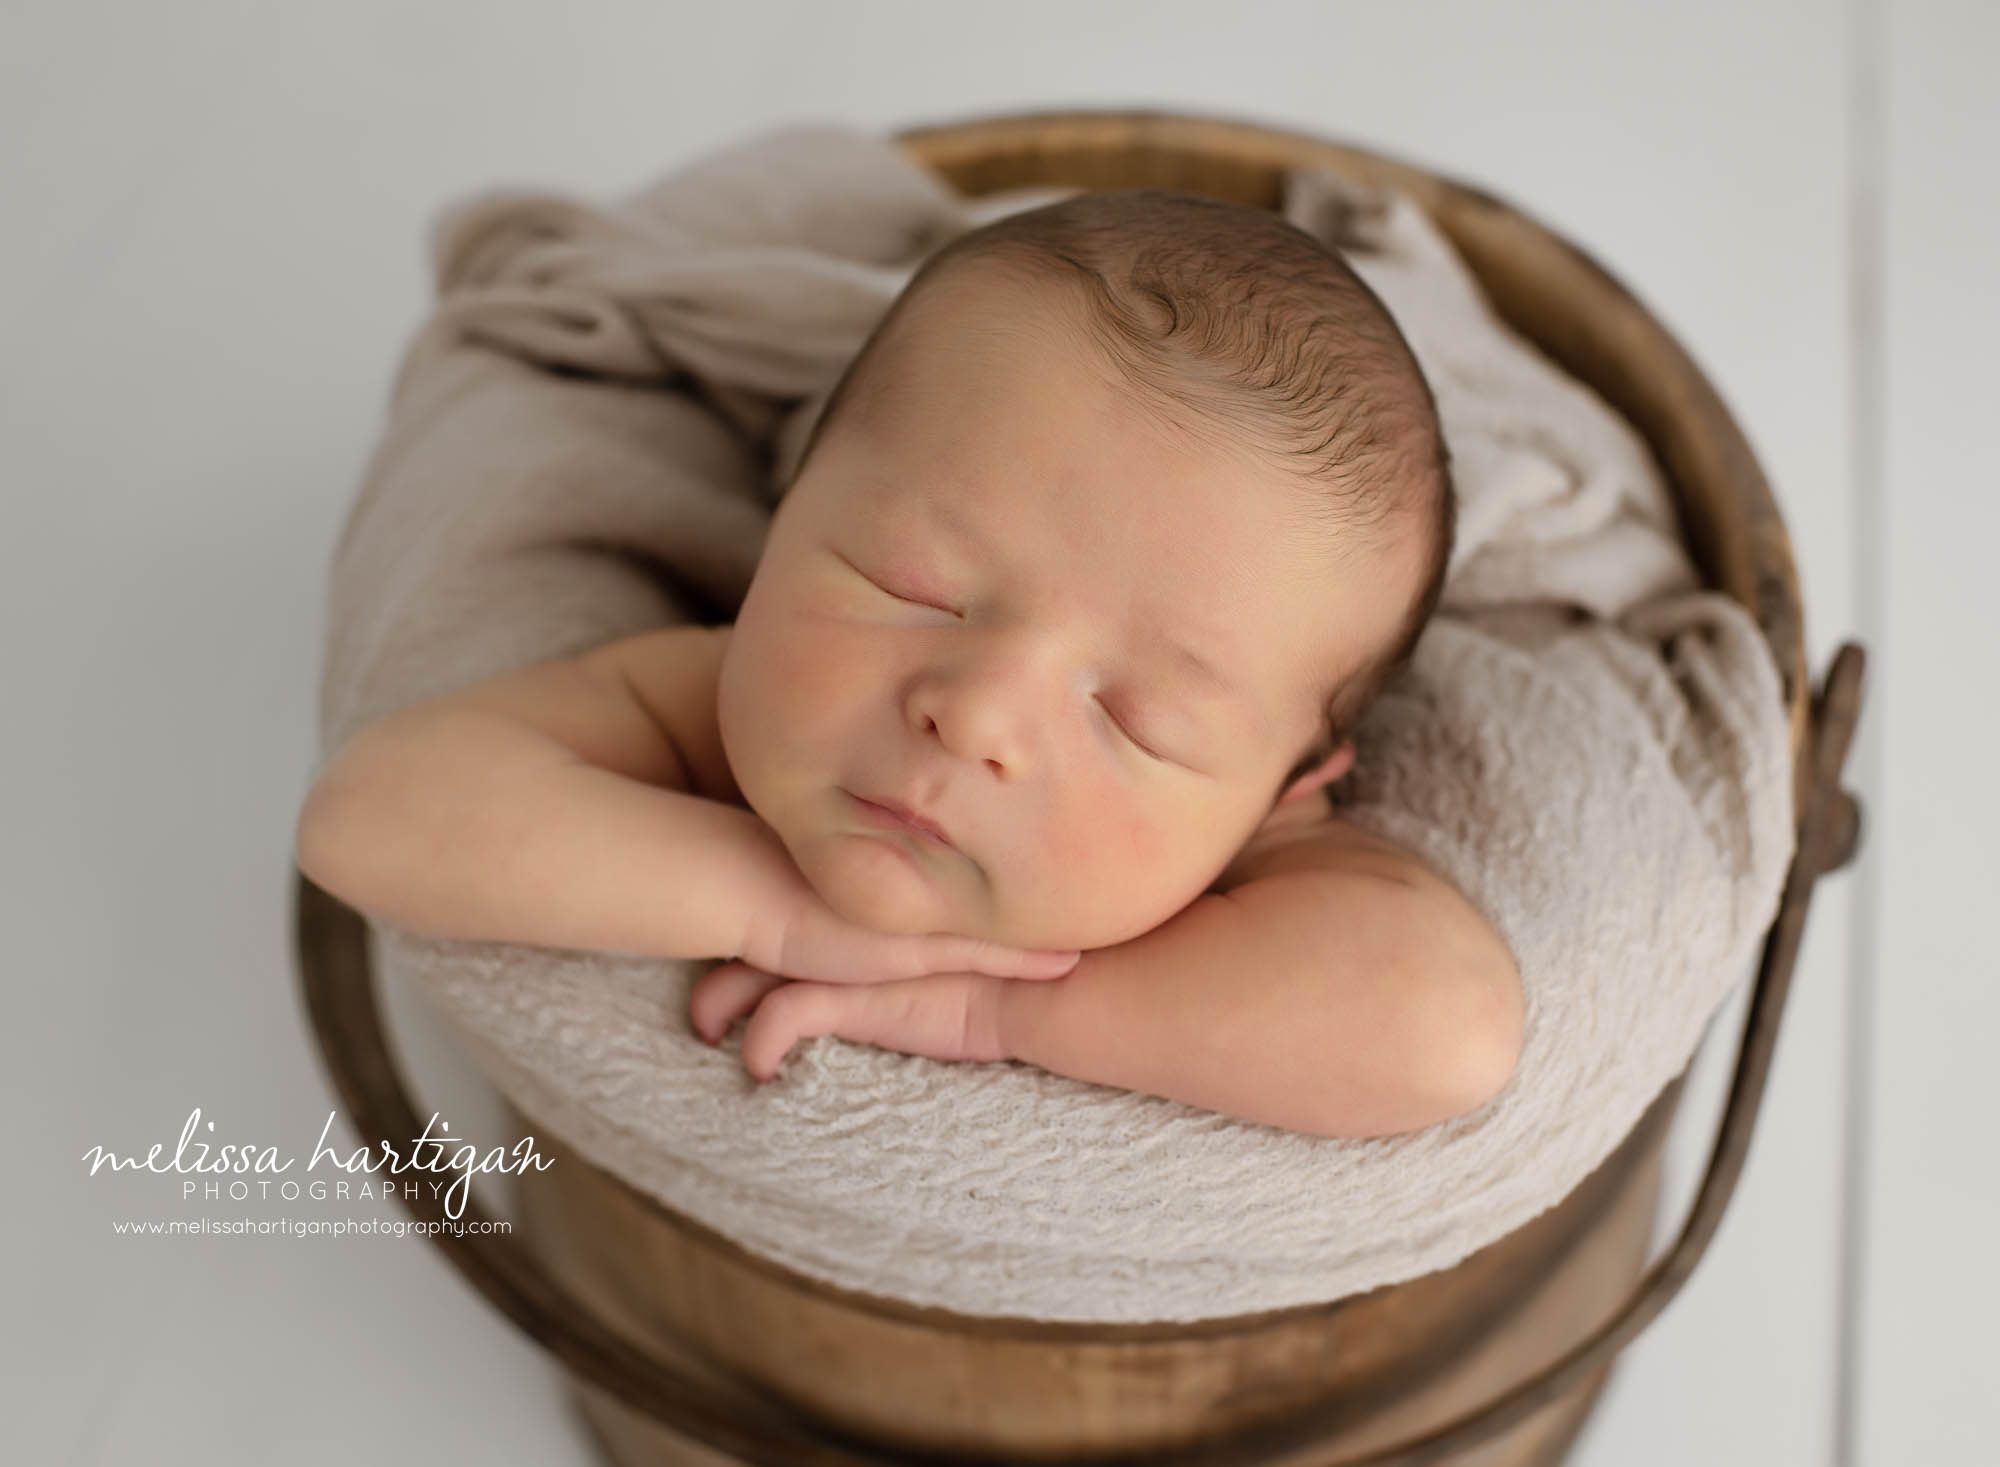 newbonr baby boy posed in wooden bucket with neutral wrap CT newborn photographer